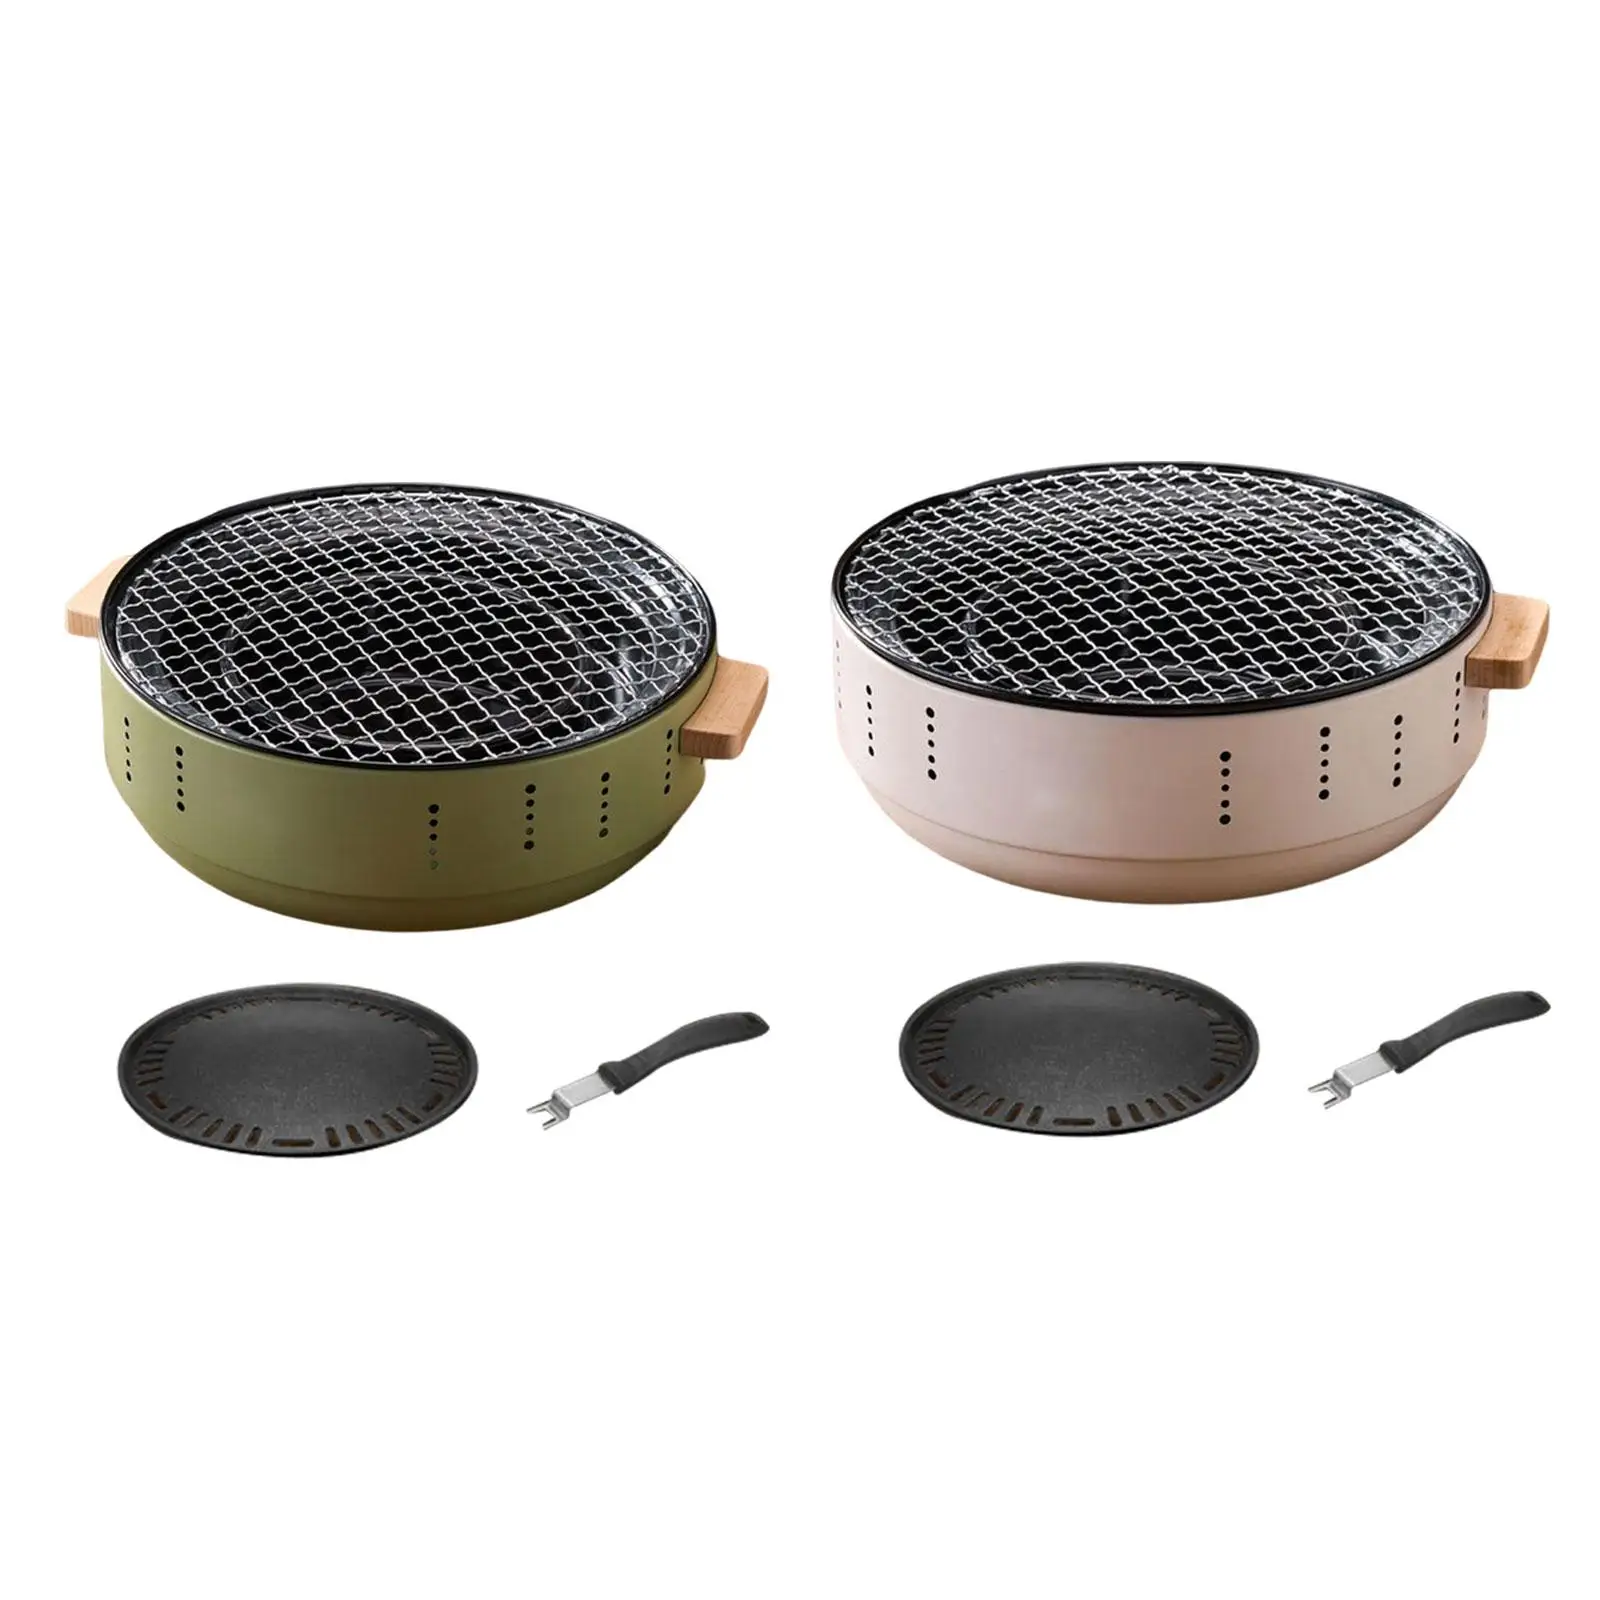 Small Barbecue Grill Multifunctional Camping Grill for Hiking Home Garden Cooking